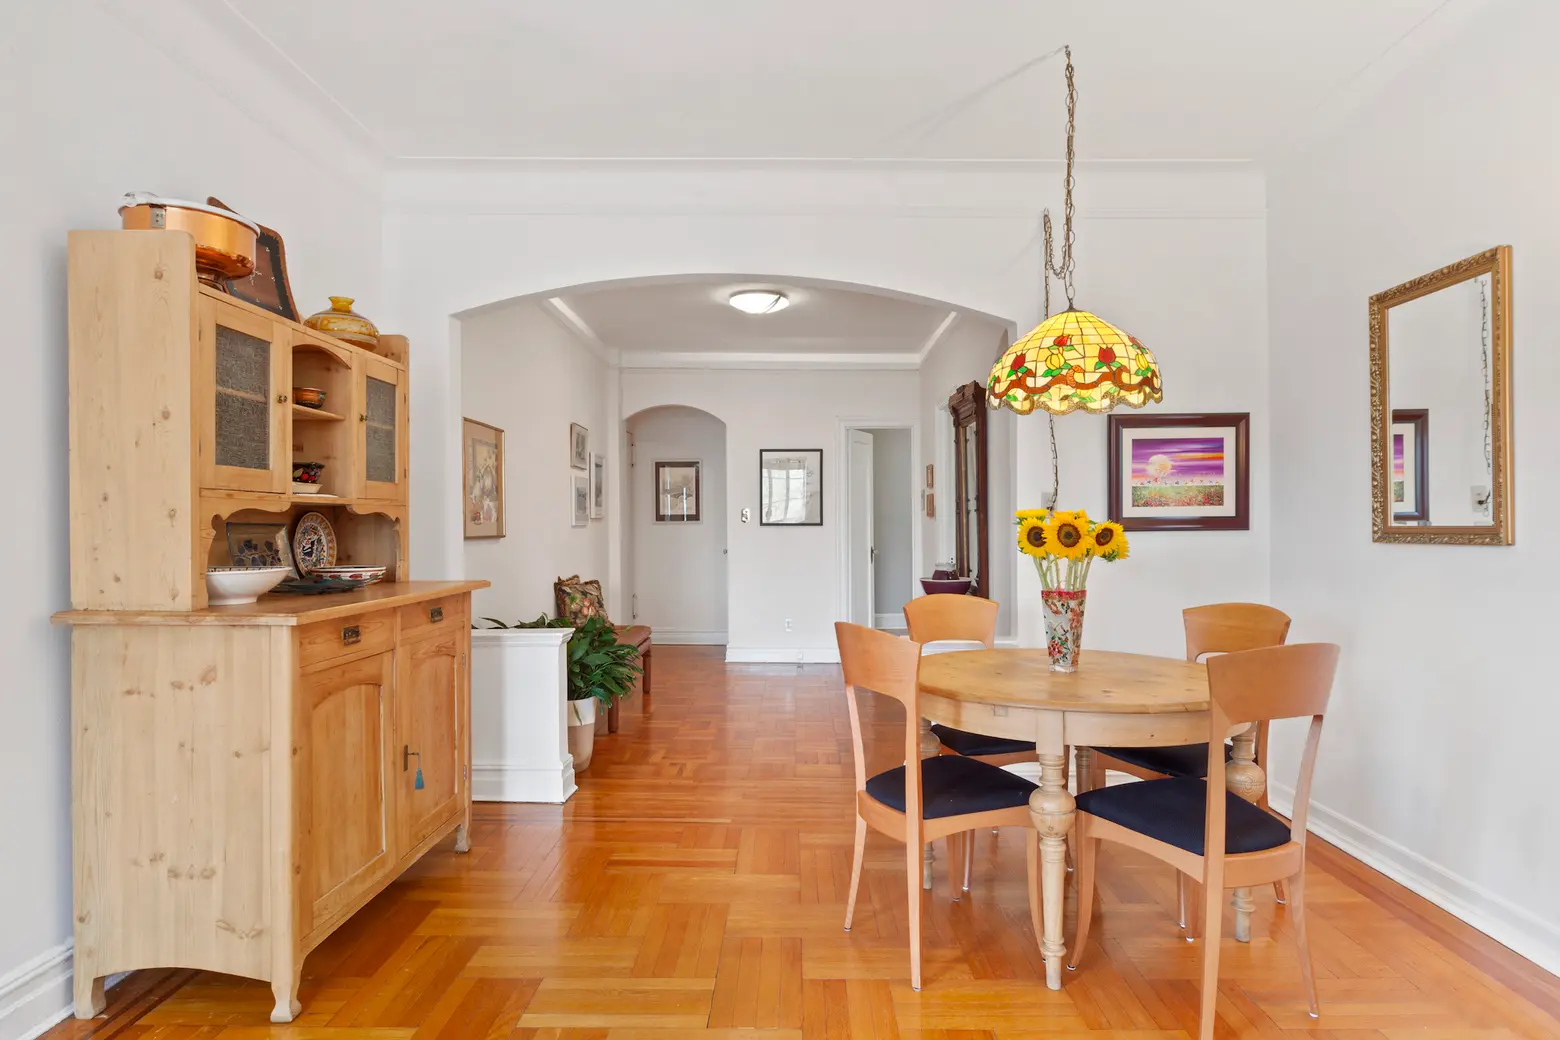 Actor Penn Badgley picks up pretty Park Slope pad for $1.83M